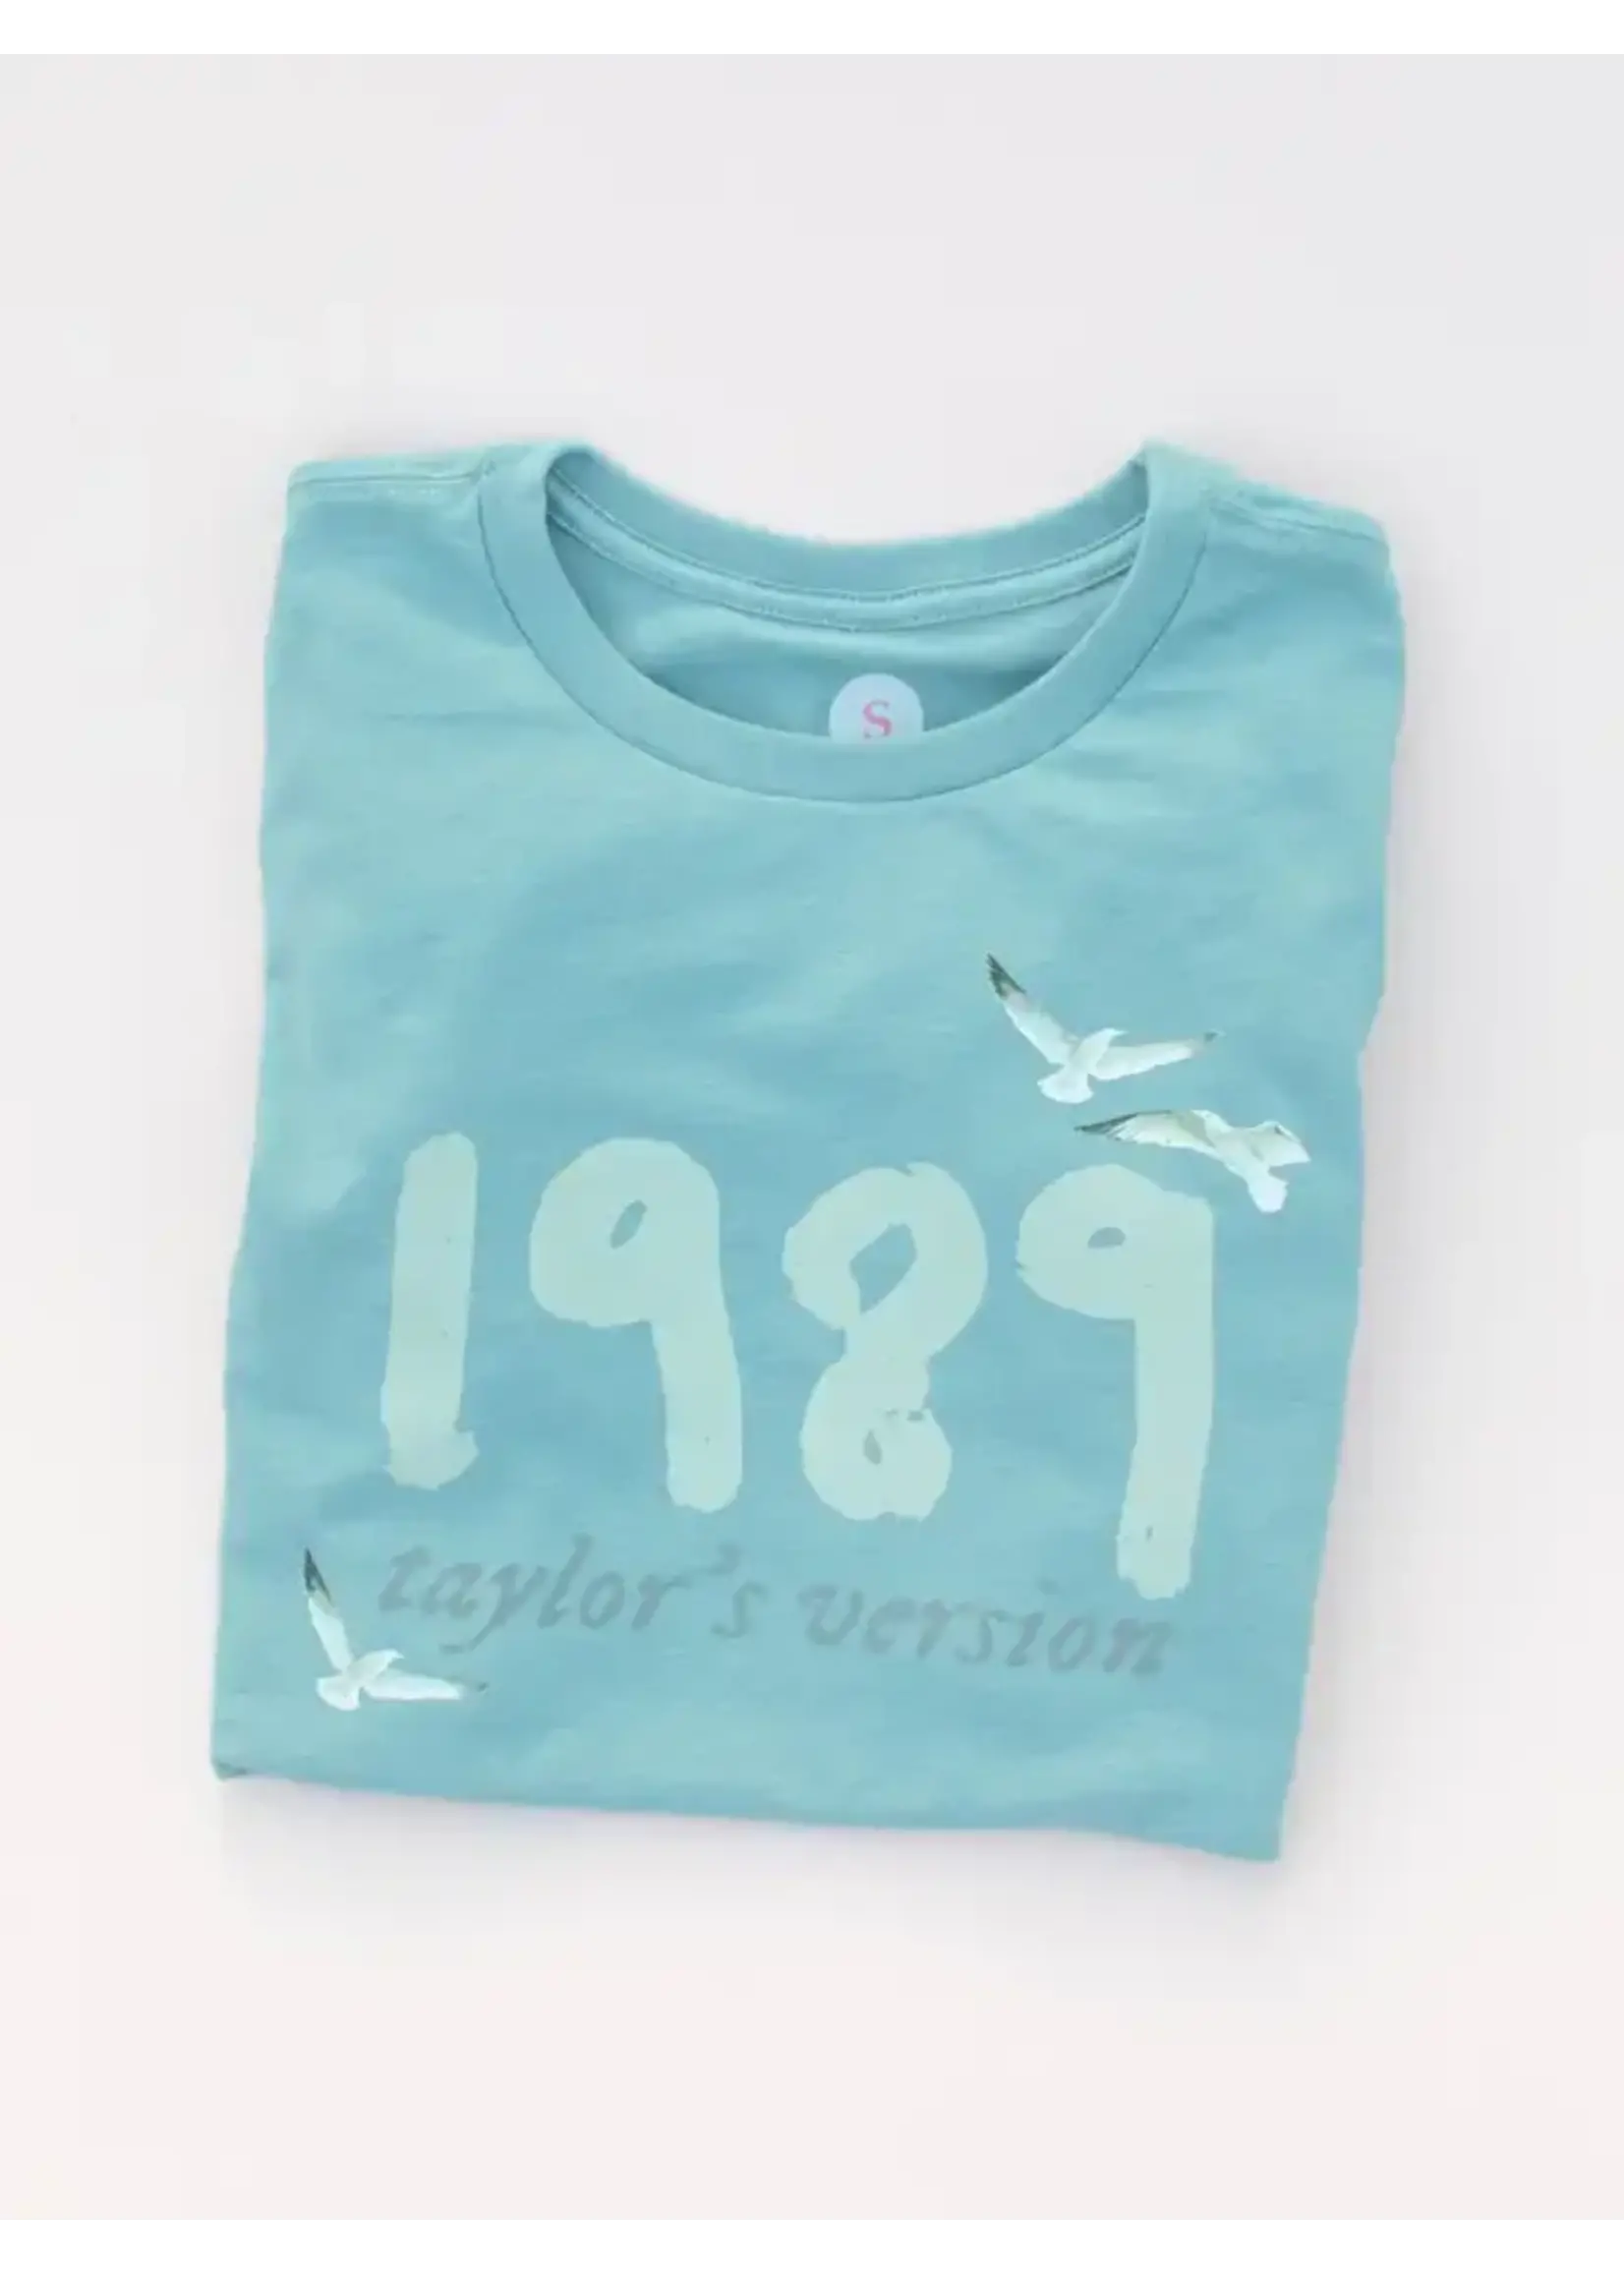 Taylor Swift Graphic Tees